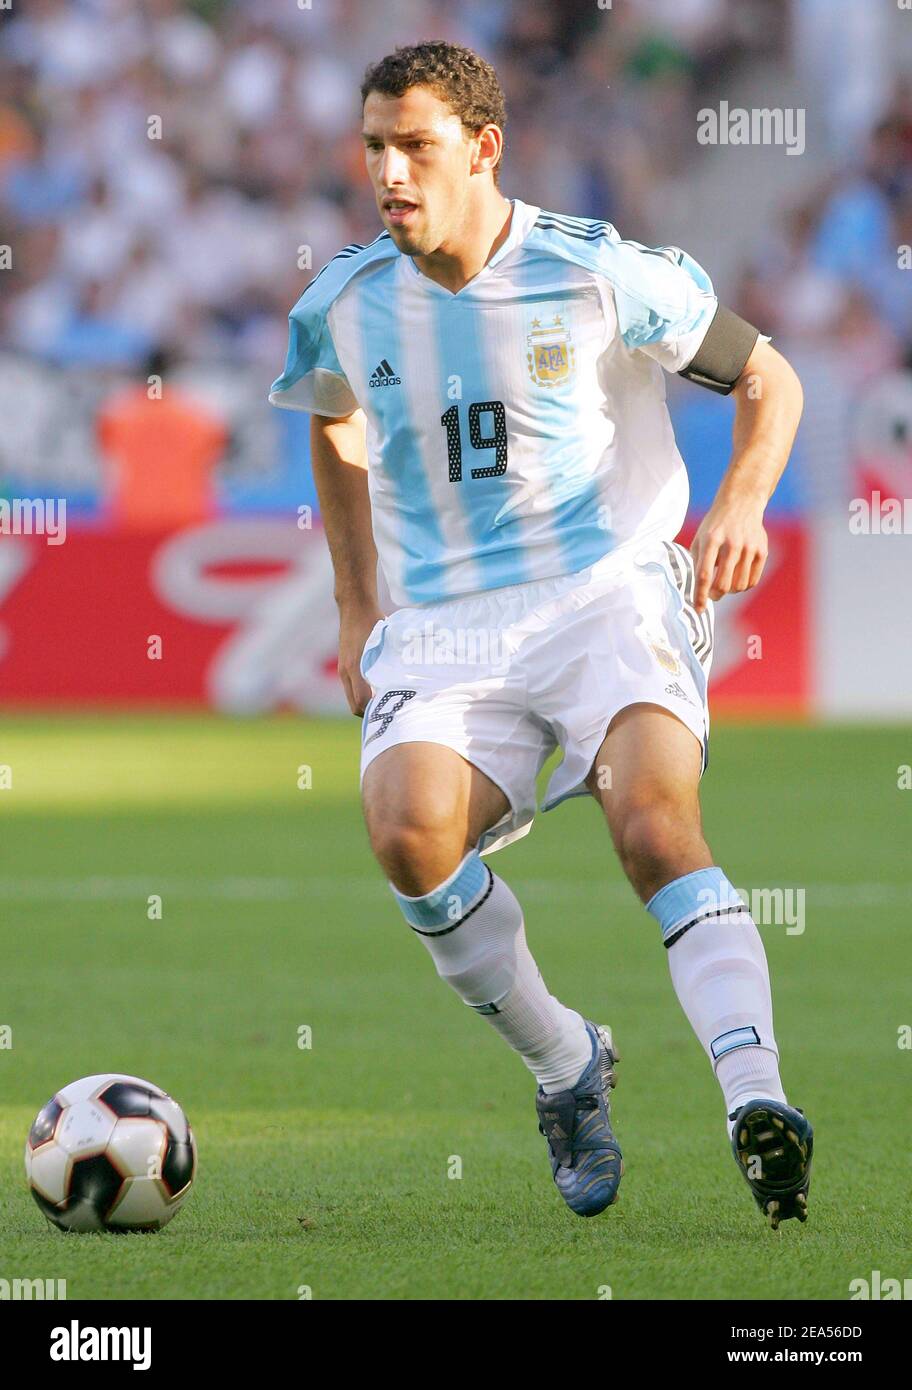 Argentina's Maximiliano Rodriguez in action during the FIFA Confederations Cup final, Argentina vs Brasil, in Frankfurt, Germany, on July 1, 2006. Photo by Christian Liewig/ABACAPRESS.COM Stock Photo